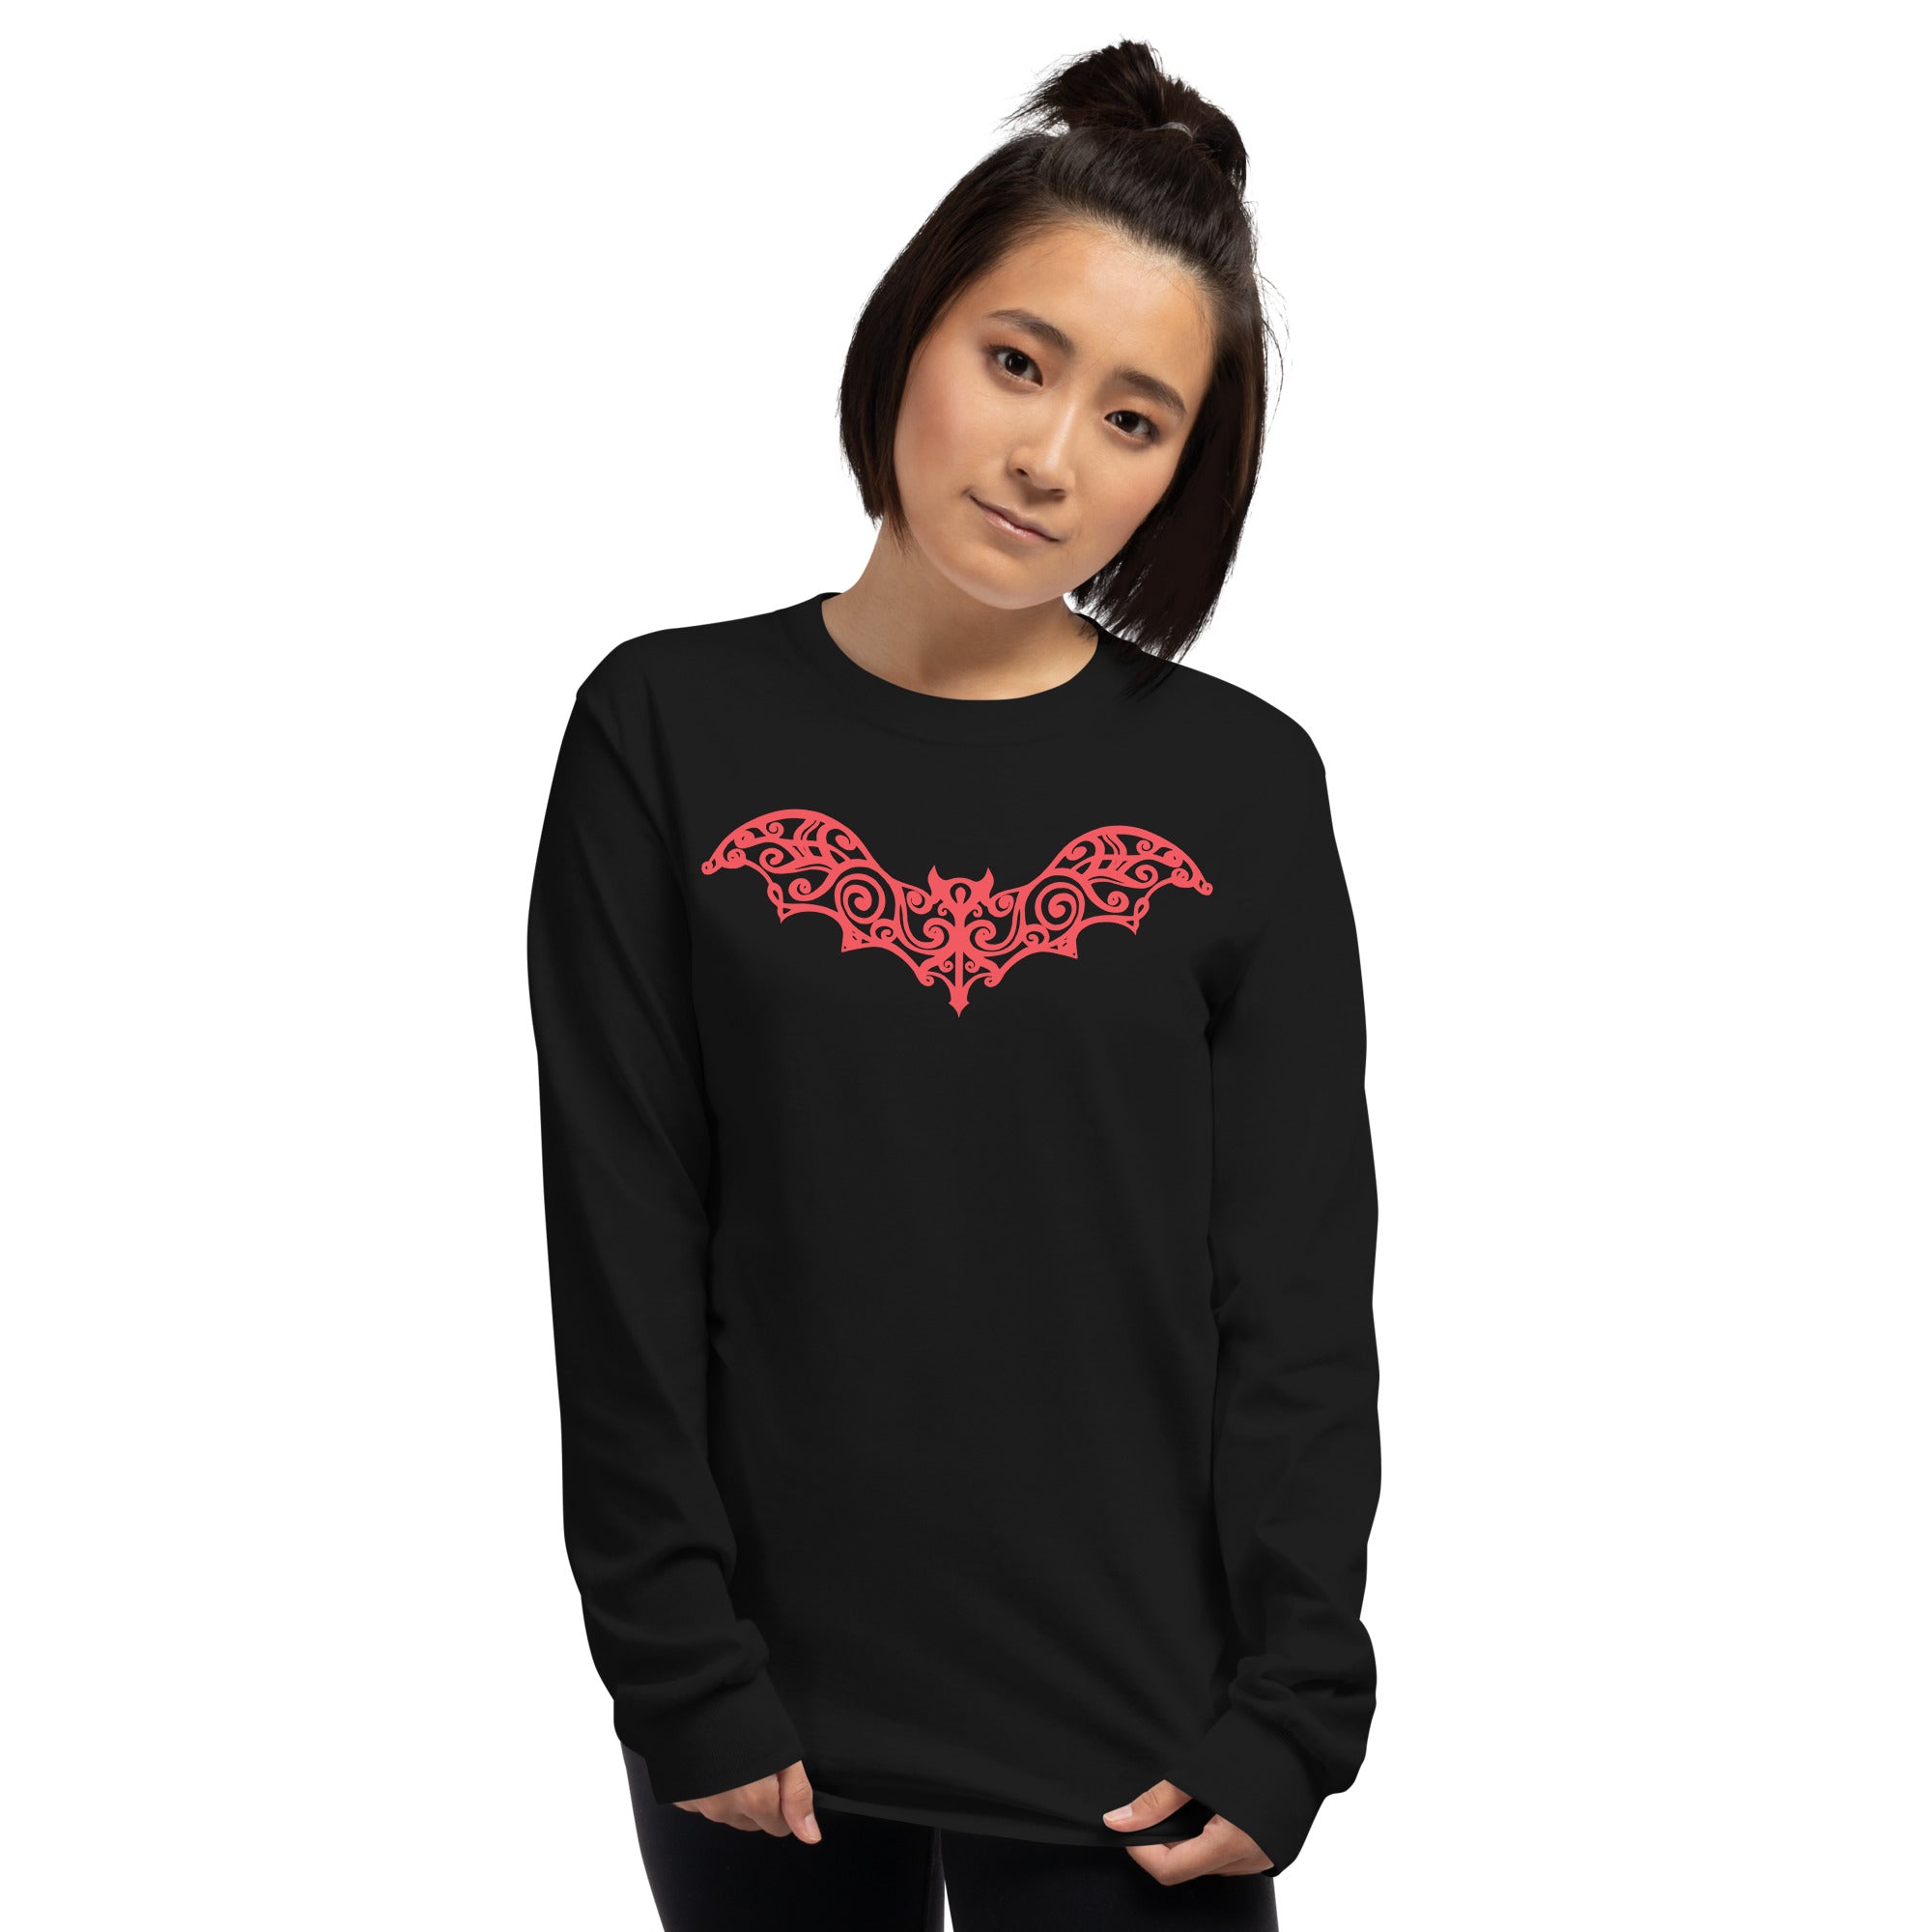 Gothic Wrought Iron Style Vine Bat Long Sleeve Shirt Red Print - Edge of Life Designs